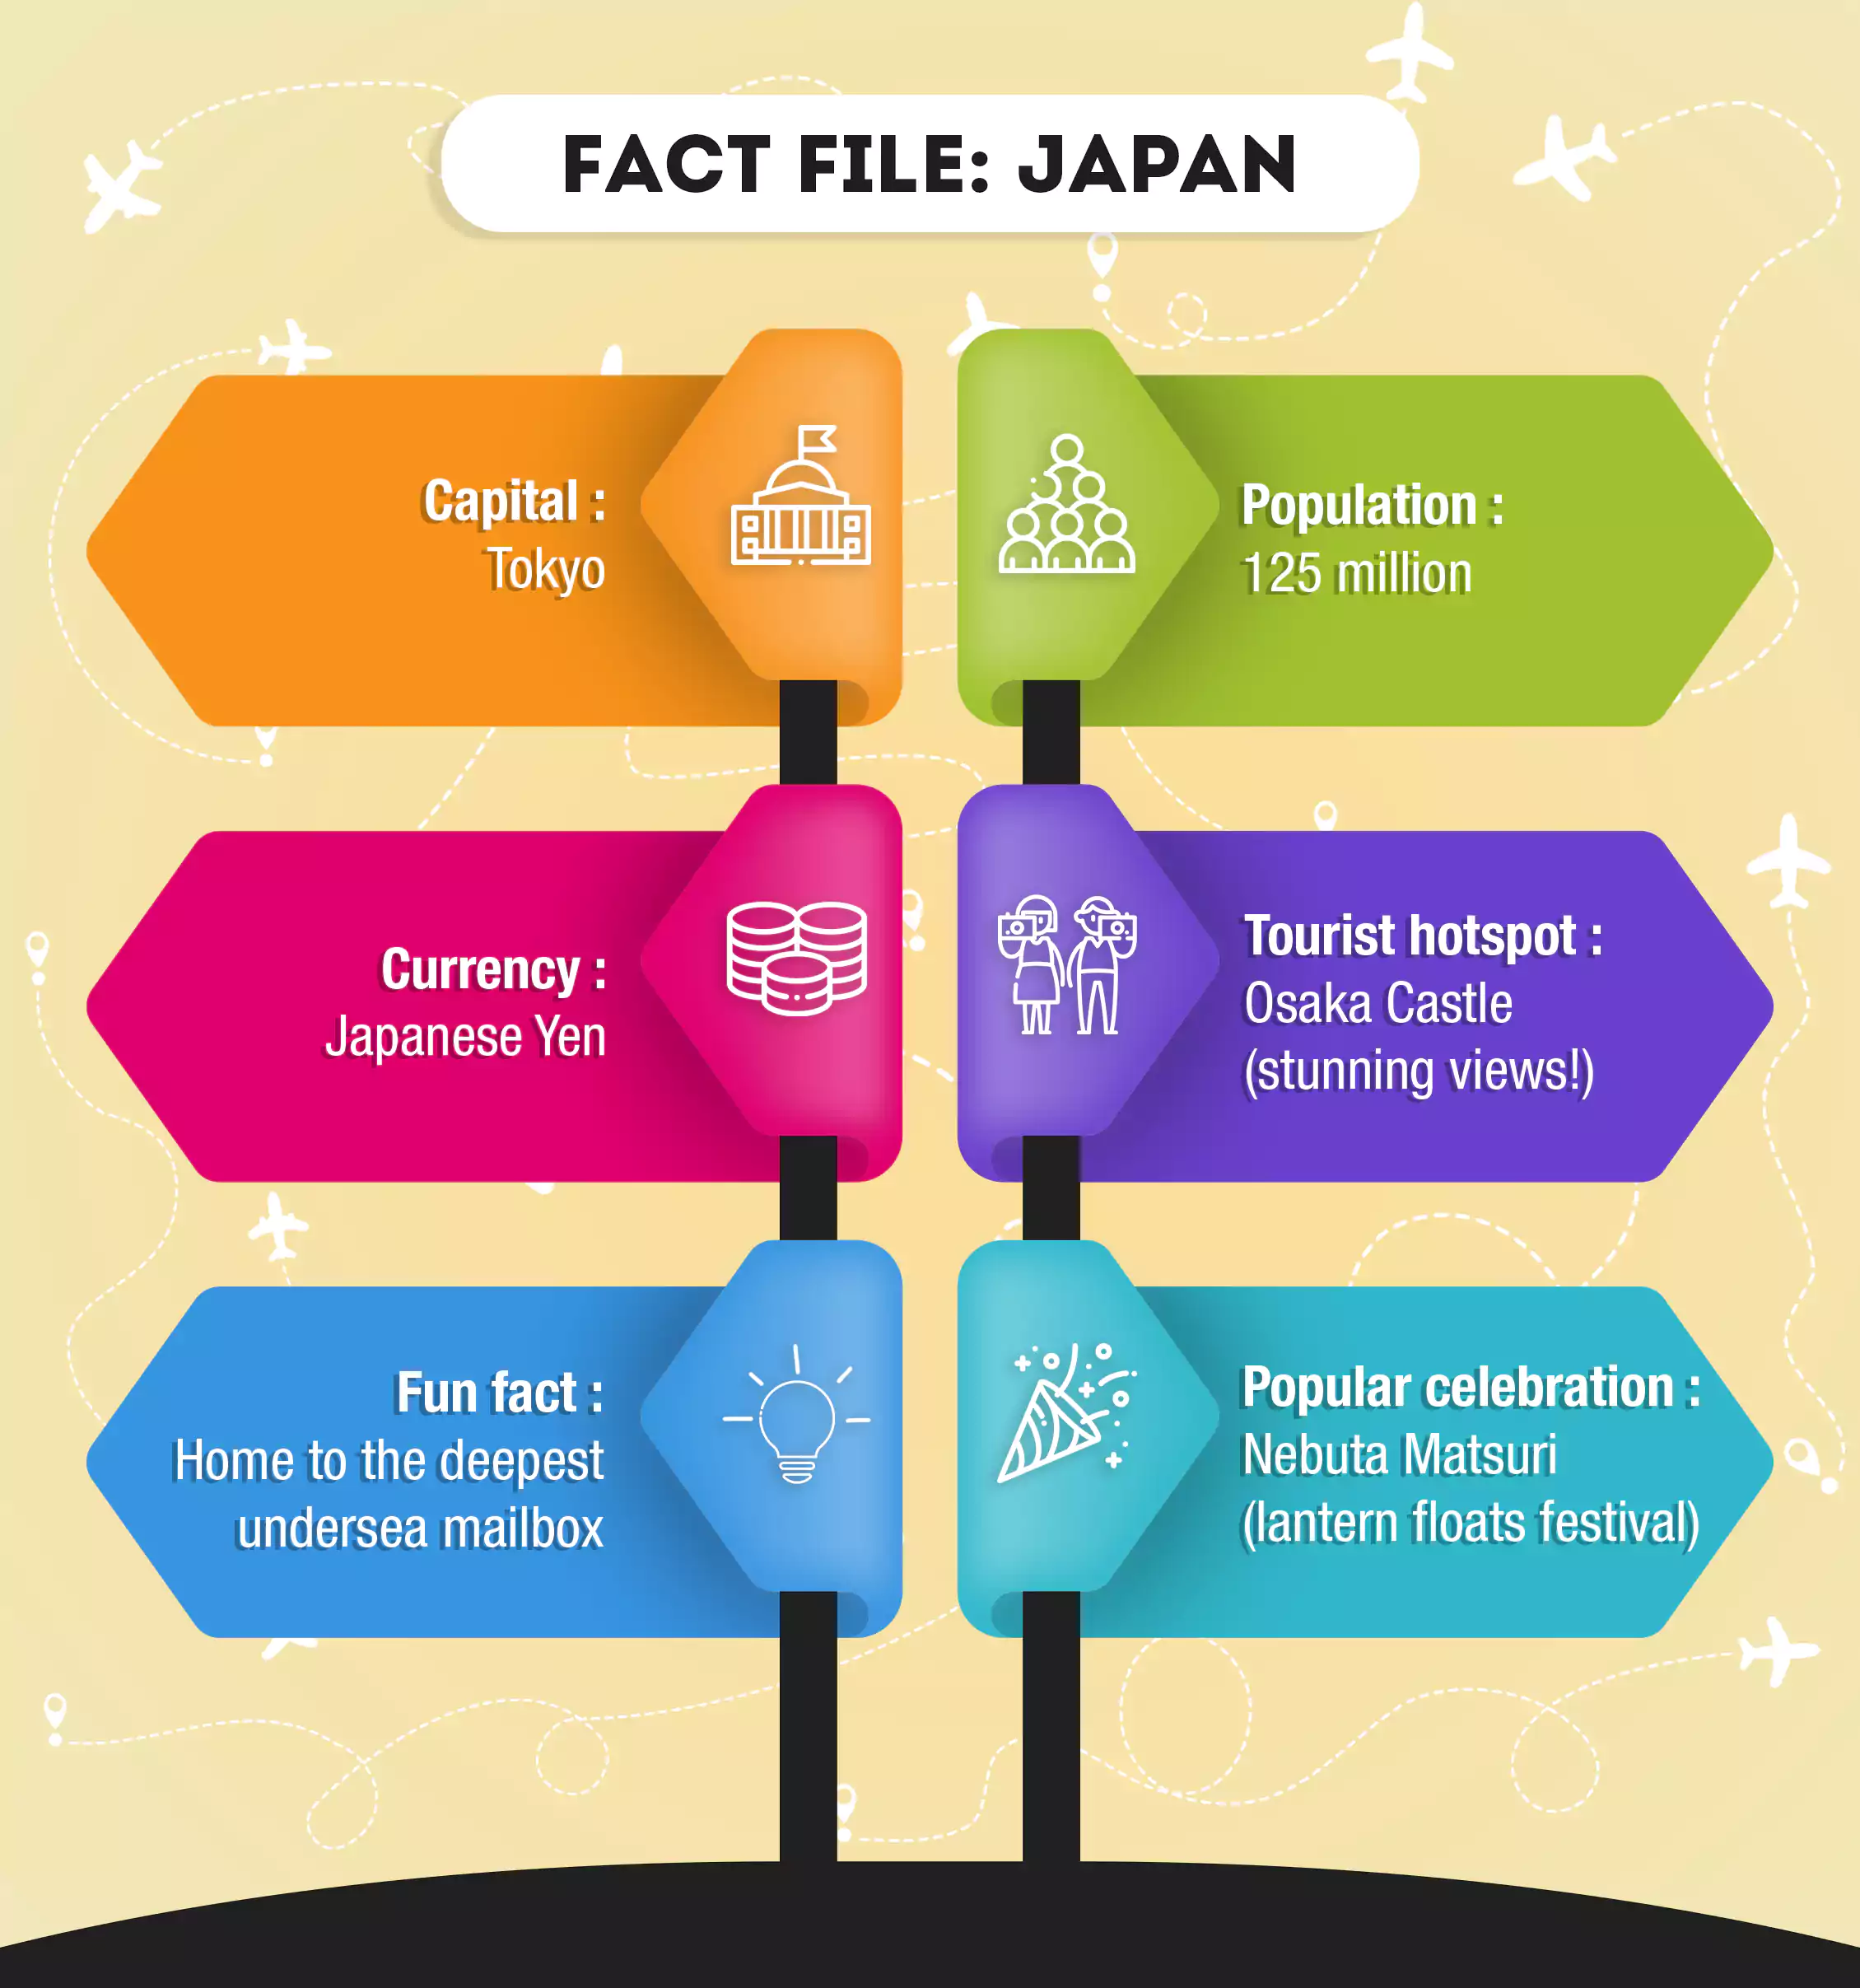 A fact file about Japan